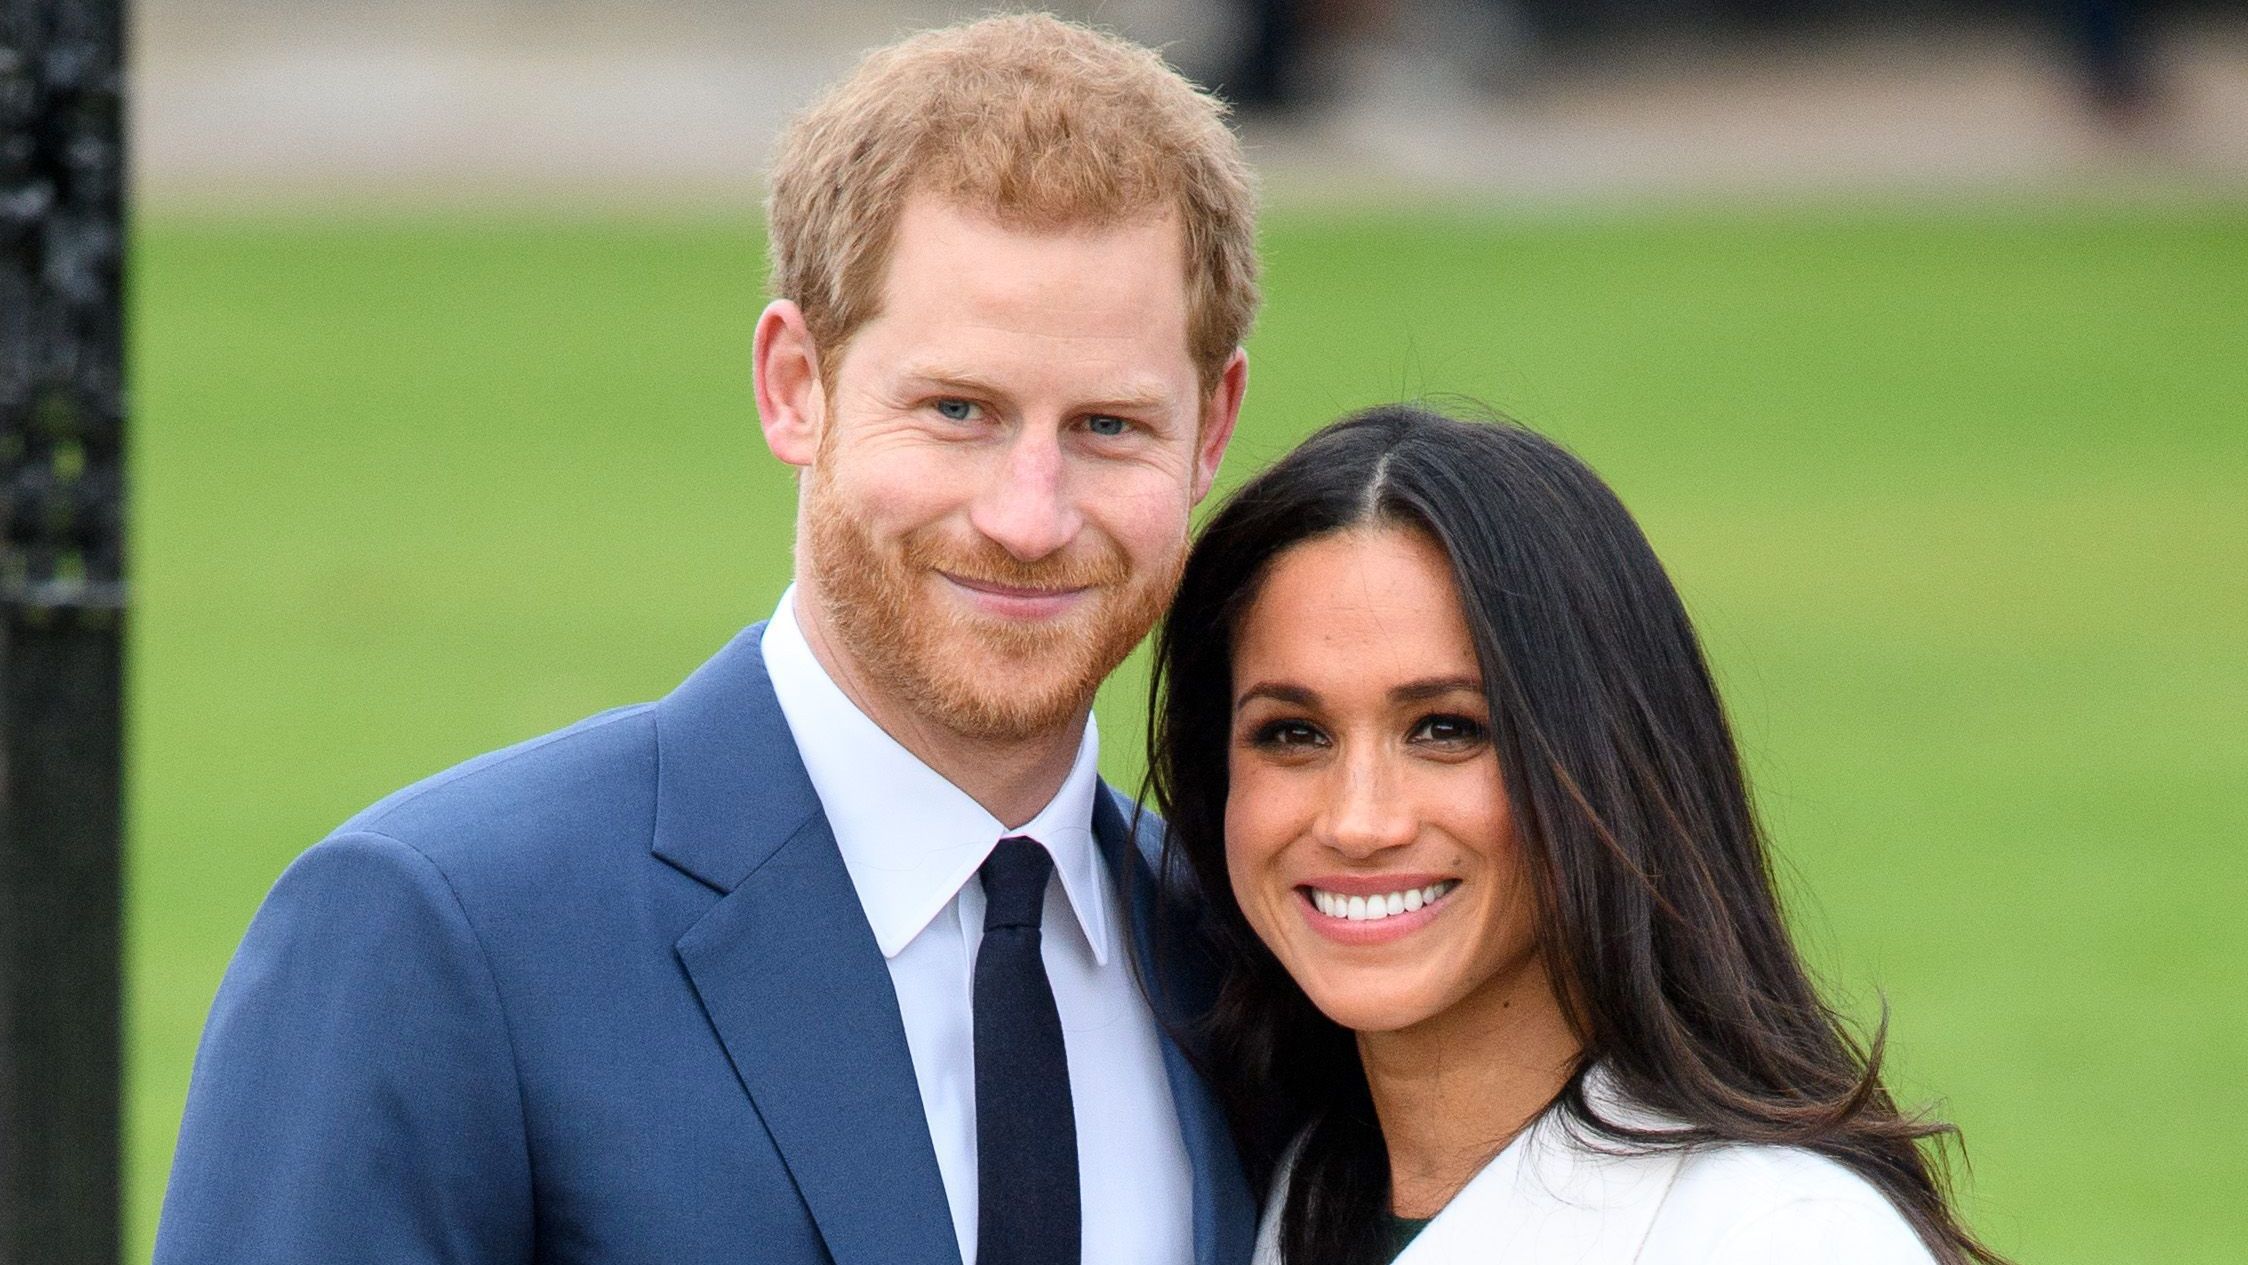 Prince Harry and Meghan Markle confirm they are expecting first baby ...